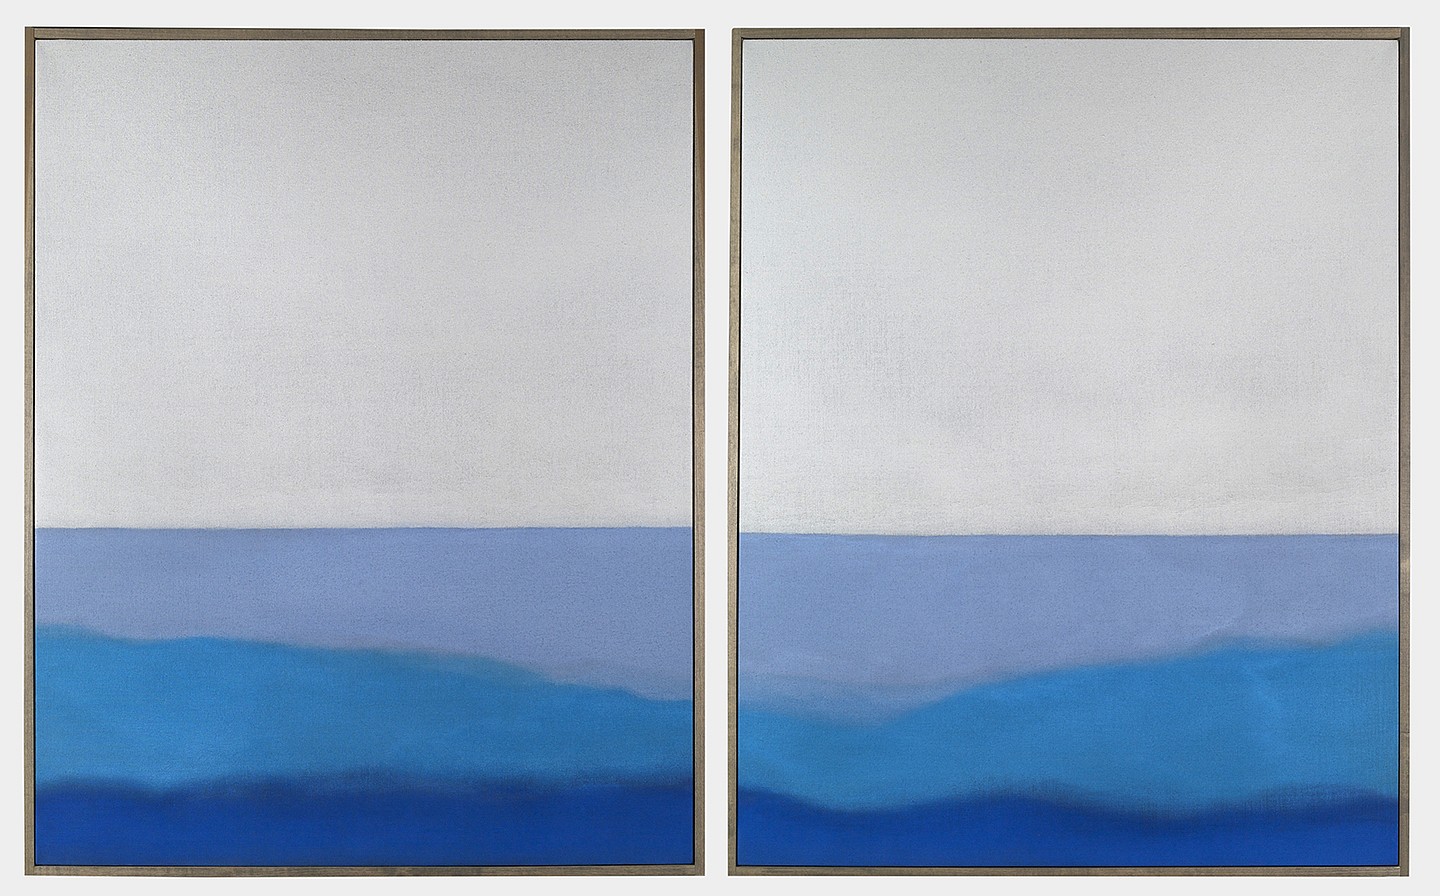 Susan Vecsey, Untitled (Blue Diptych) | SOLD, 2014
Oil on linen, 66 x 104 in. (167.6 x 264.2 cm)
SOLD

Each panel 66 x 52
VEC-00040